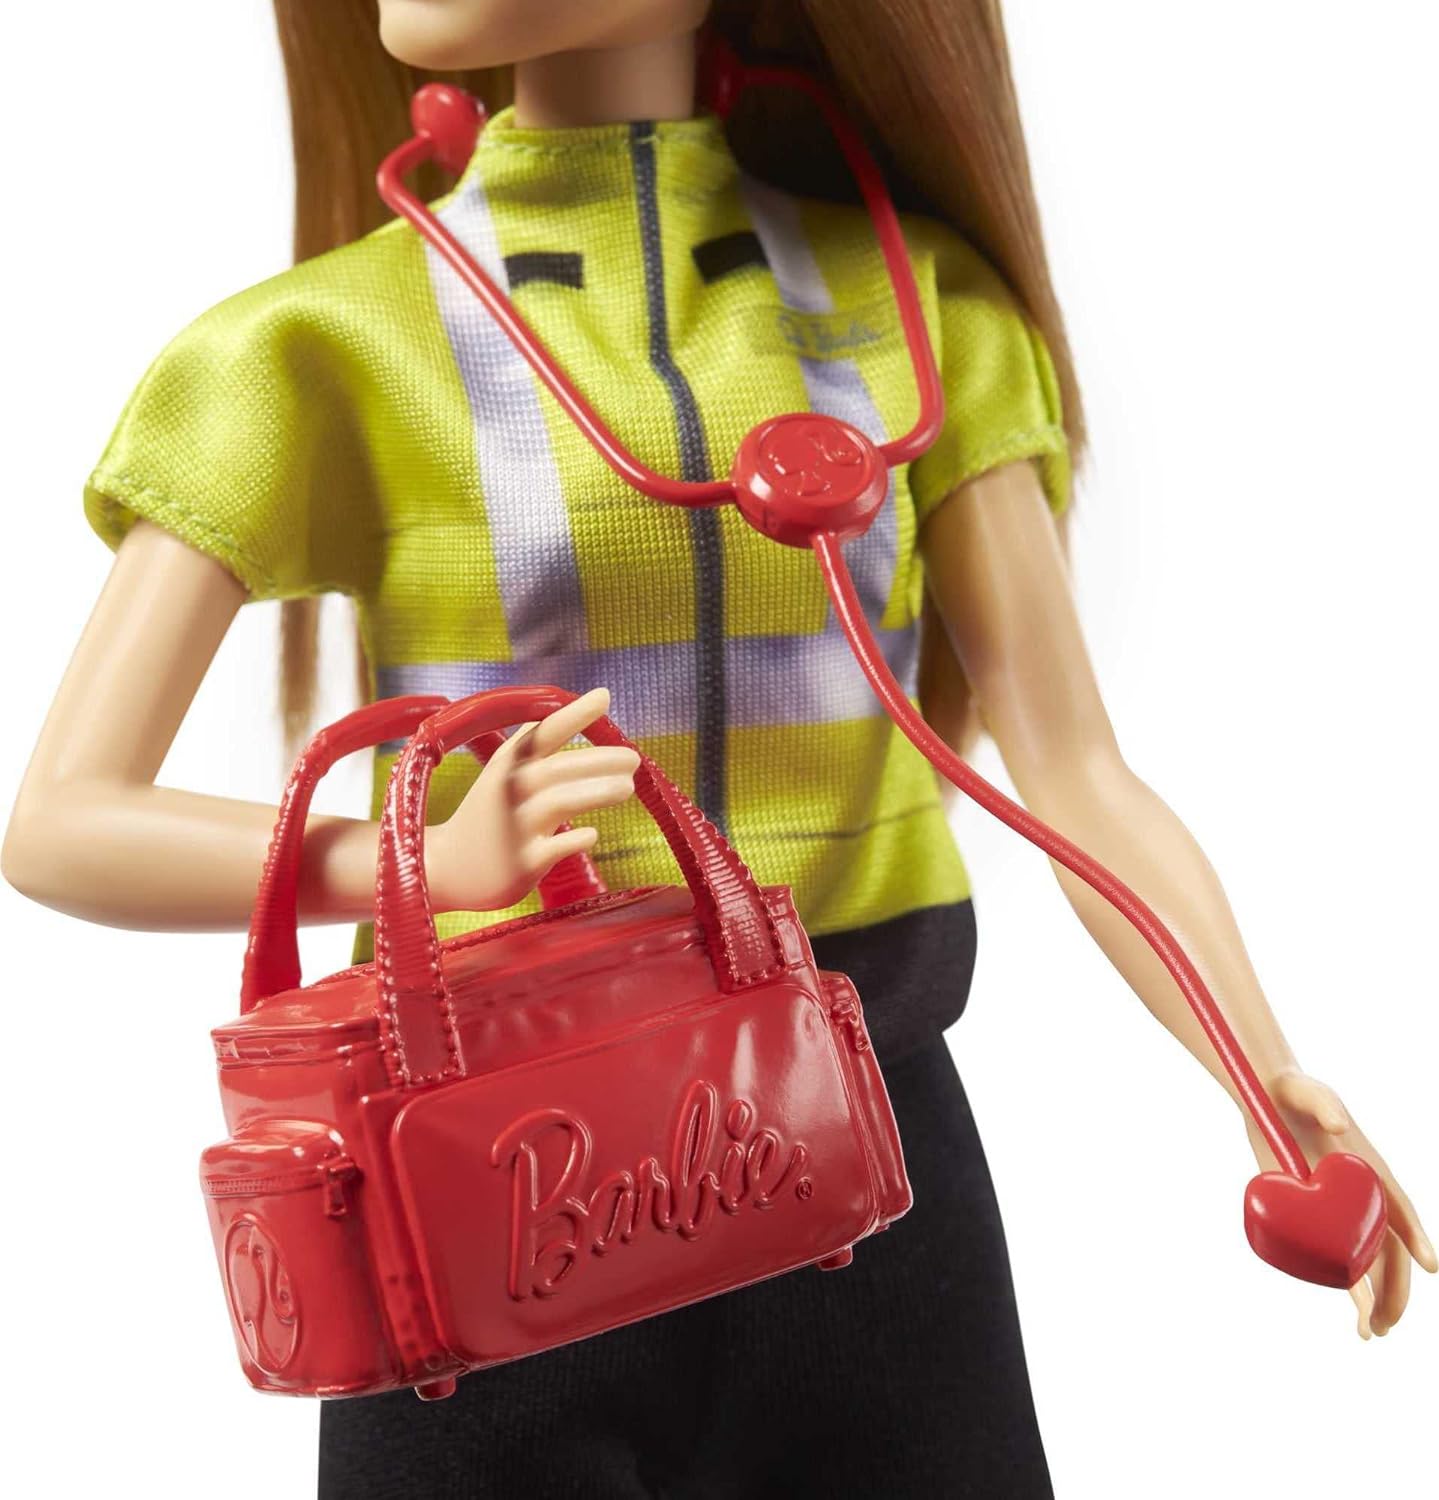 Barbie Paramedic Petite 12 Inch Fashion Doll with Brunette Hair, Stethoscope, Medical Bag & Accessories